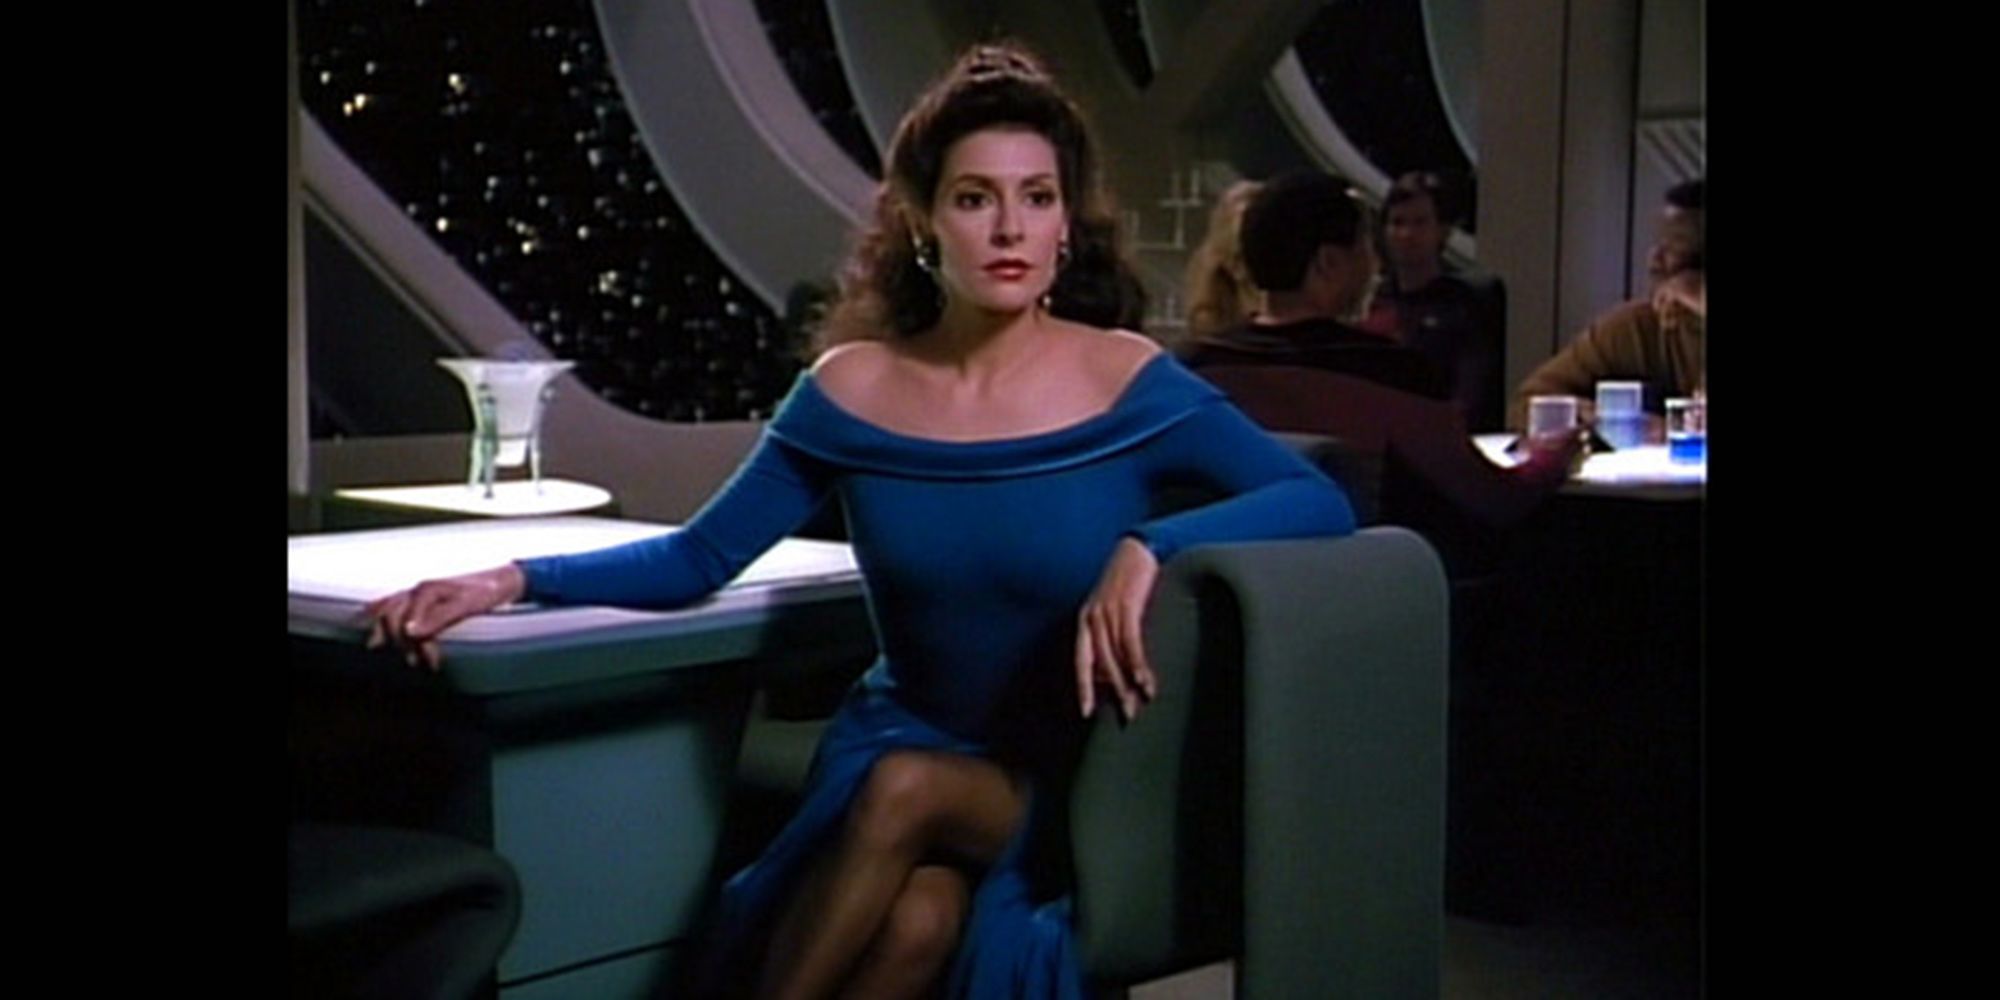 Deanna Troi in The Next Generation sitting down.